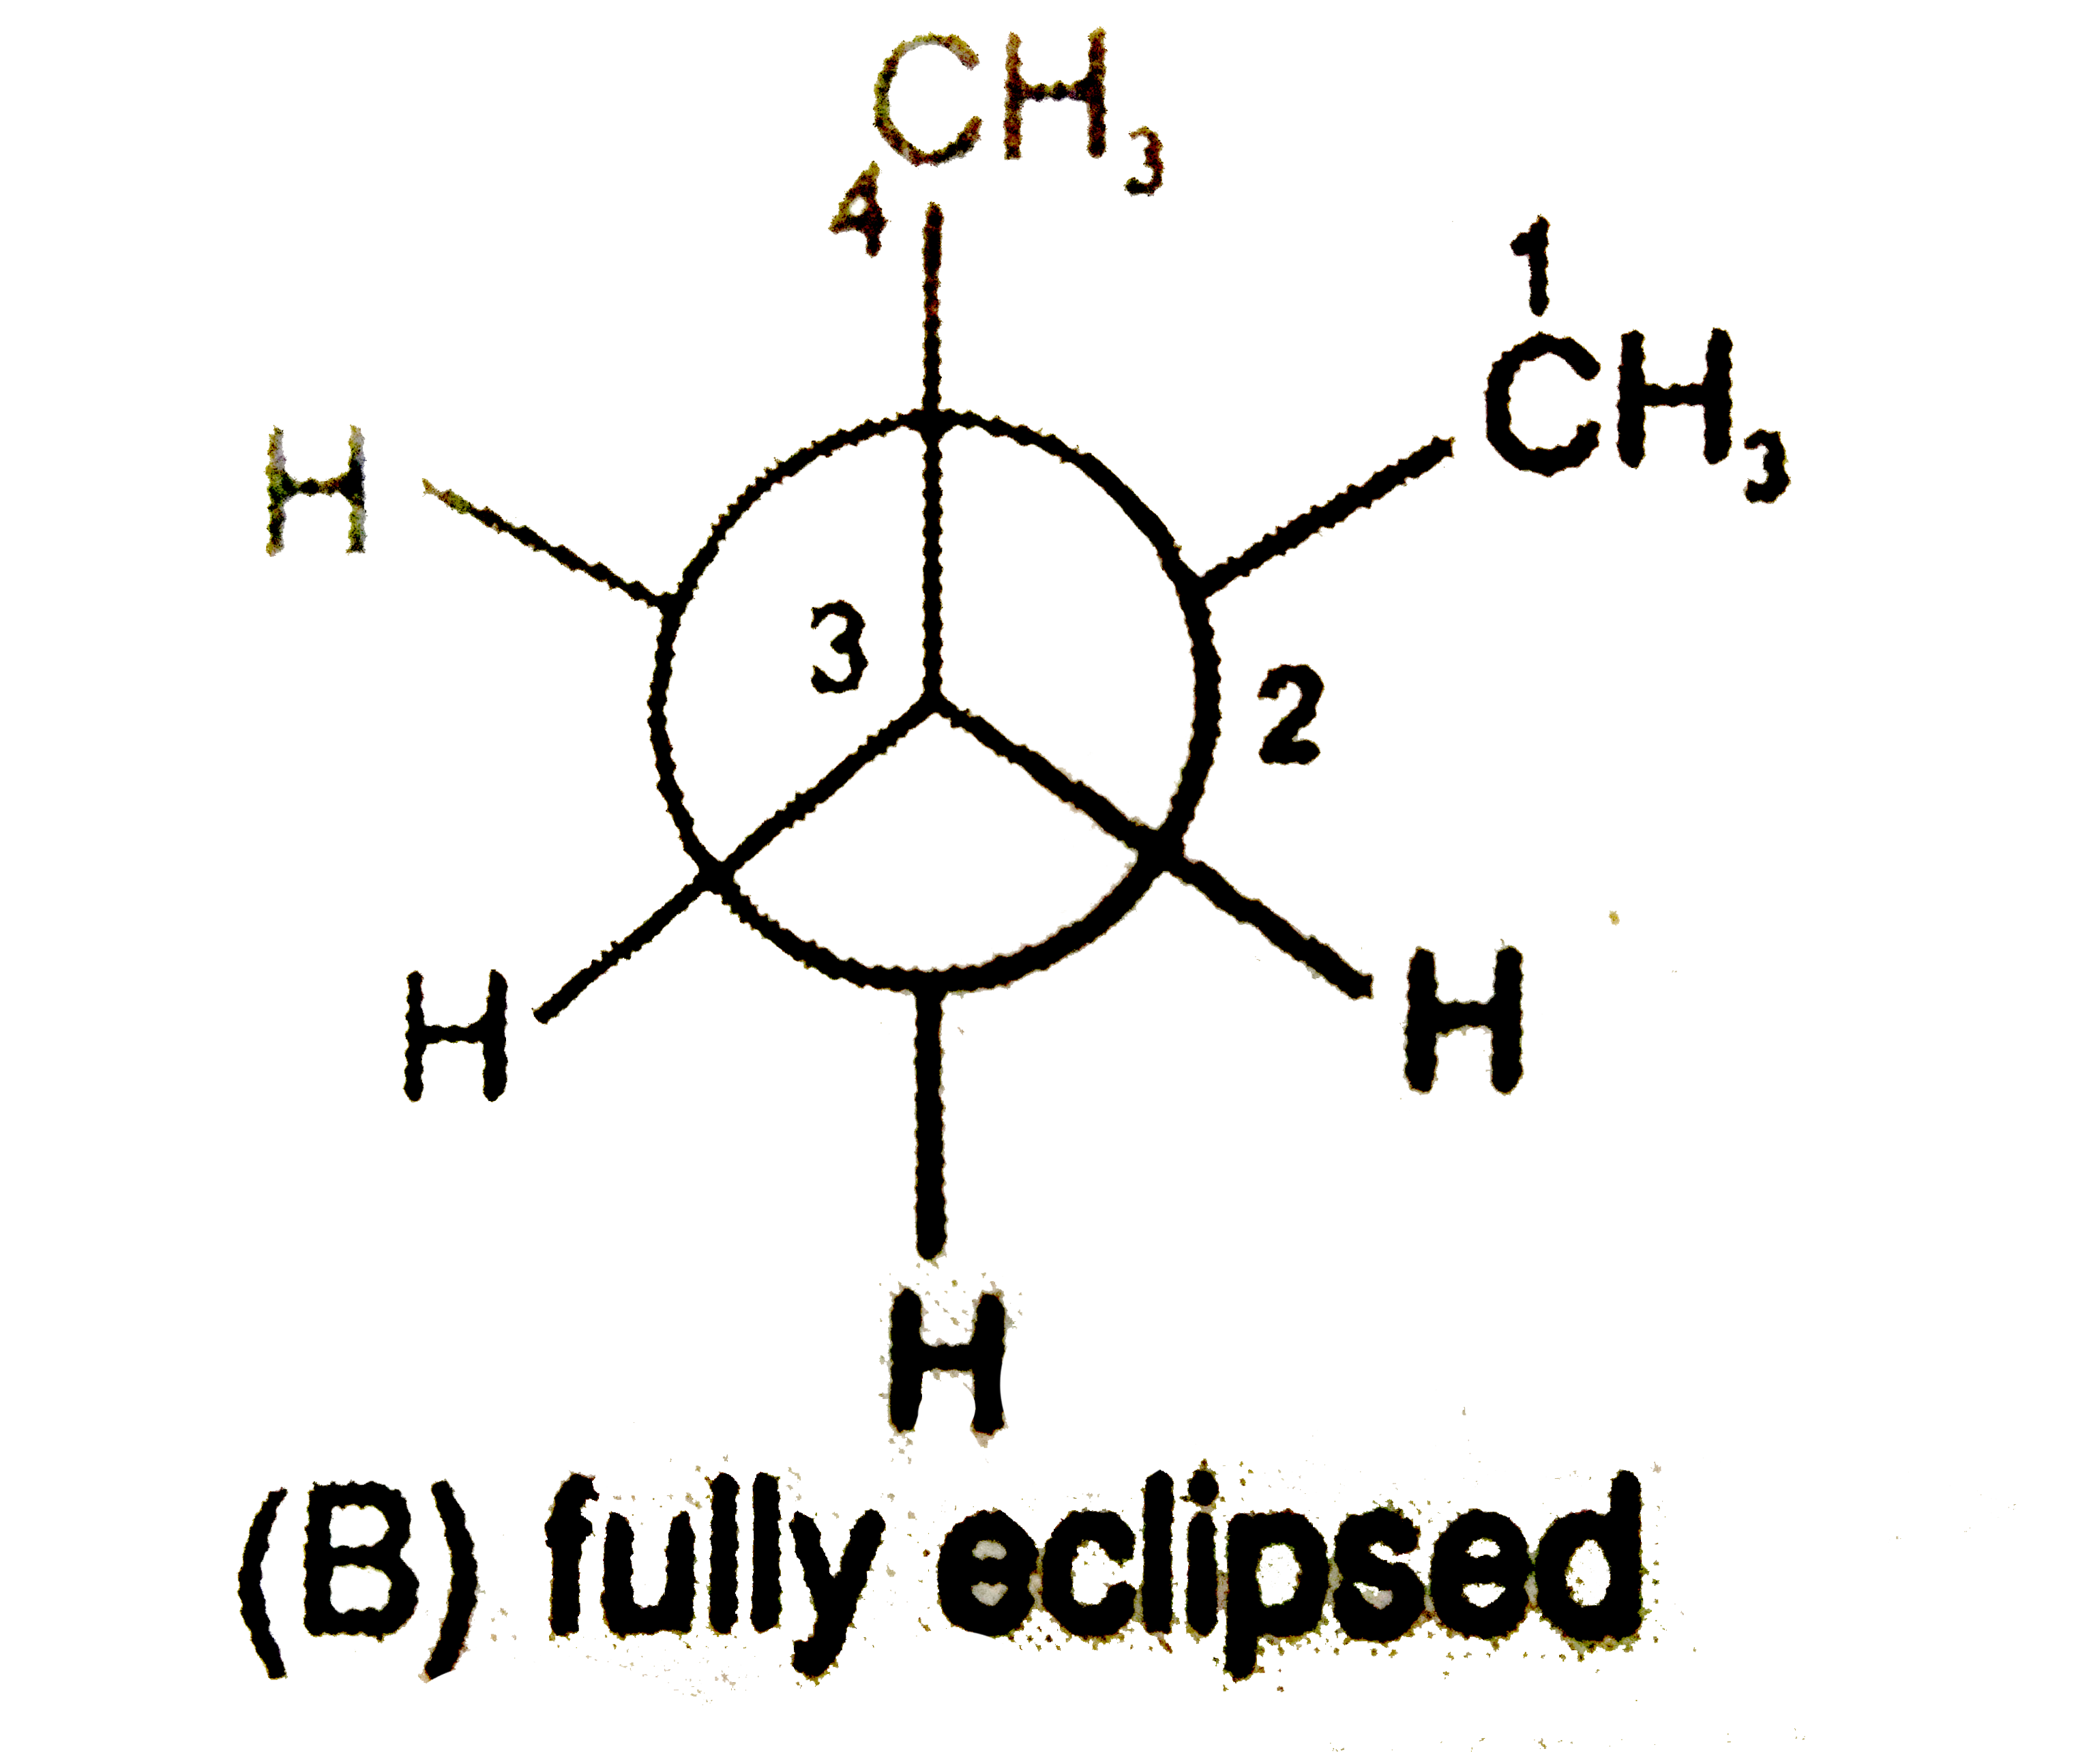 Newman projection of Butane is given, C-2 is rotated by 120^(º) along C(2)-C(3) bond in anticloclwise direction, the conformation formed is :